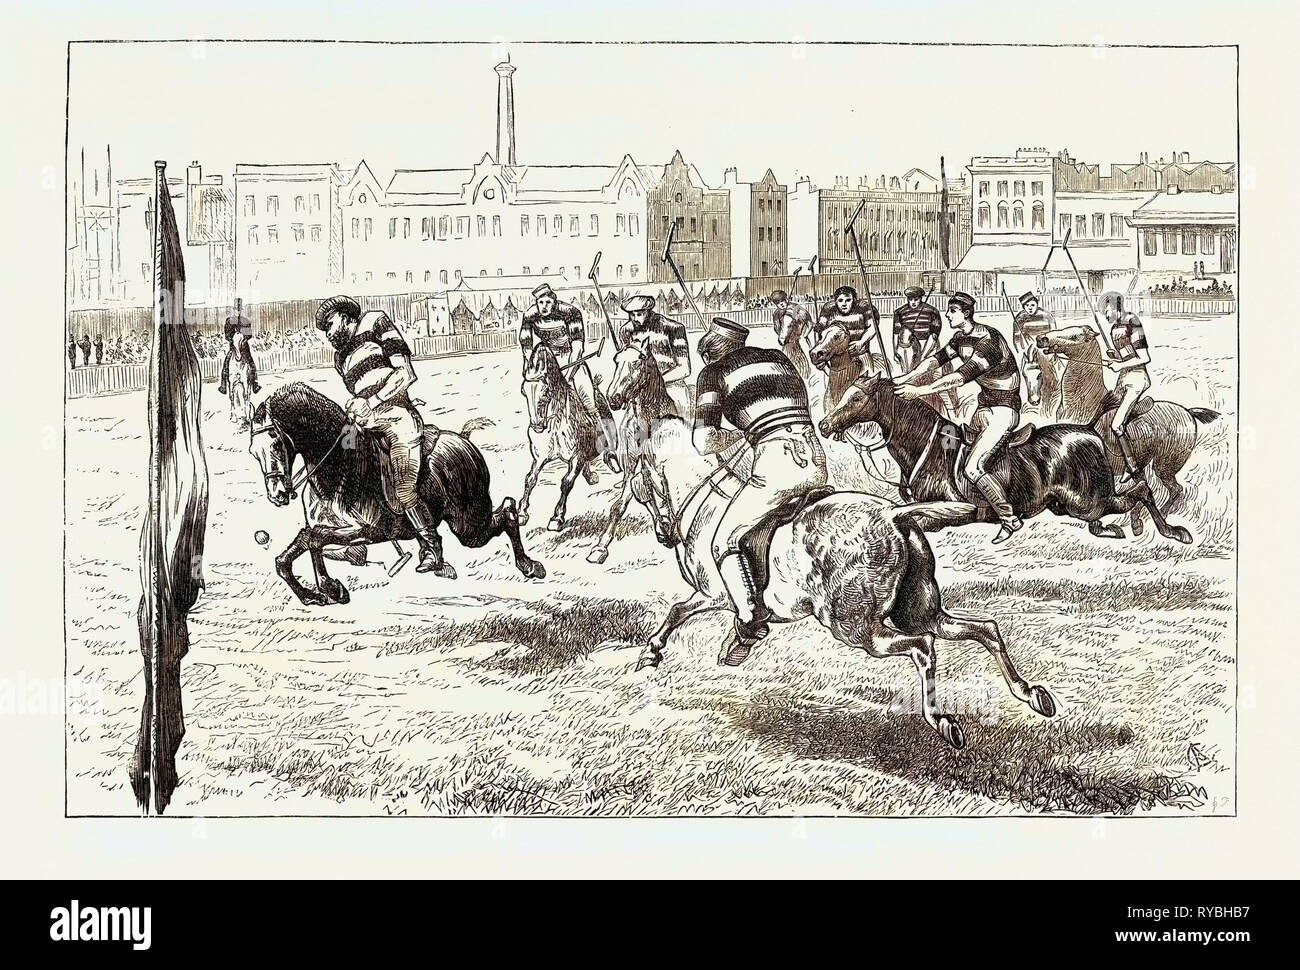 Polo Match at Lillie Bridge in Aid of the Funds of the West London Hospital, UK, 1890 Engraving Stock Photo